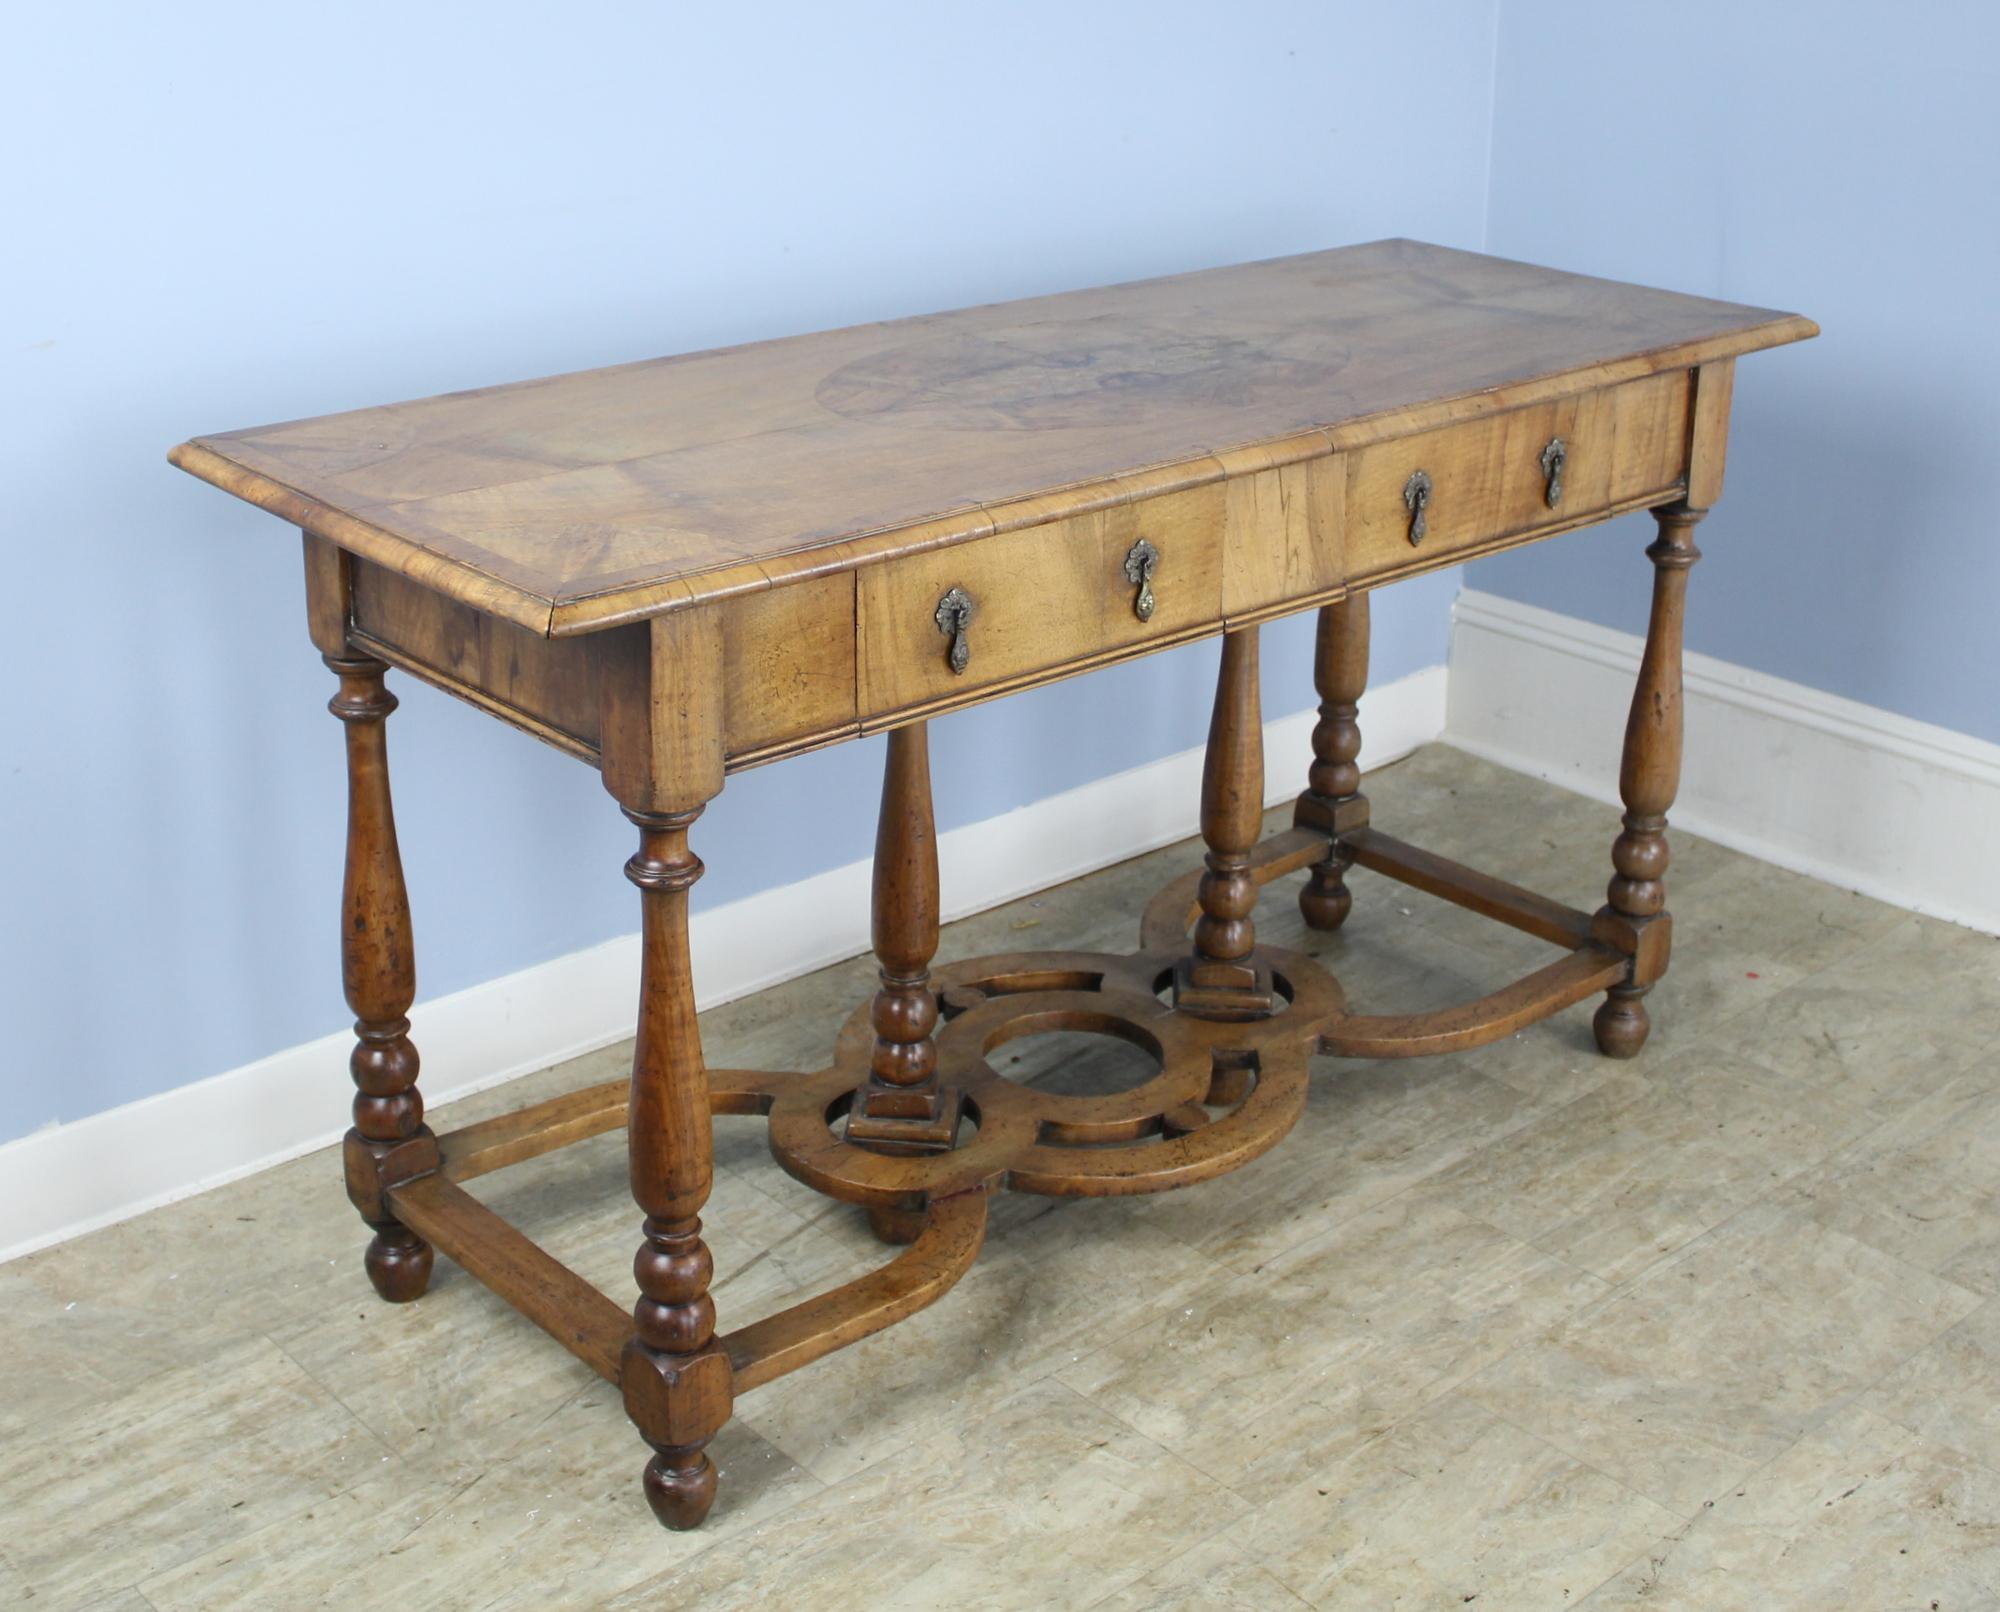 A splendid early pale walnut console or server with ornate turned legs and supports. The splendid book matched walnut veneer on top is eye-catching, with small areas of age appropriate wear. Two small drawers provide storage. Teardrop escutcheons